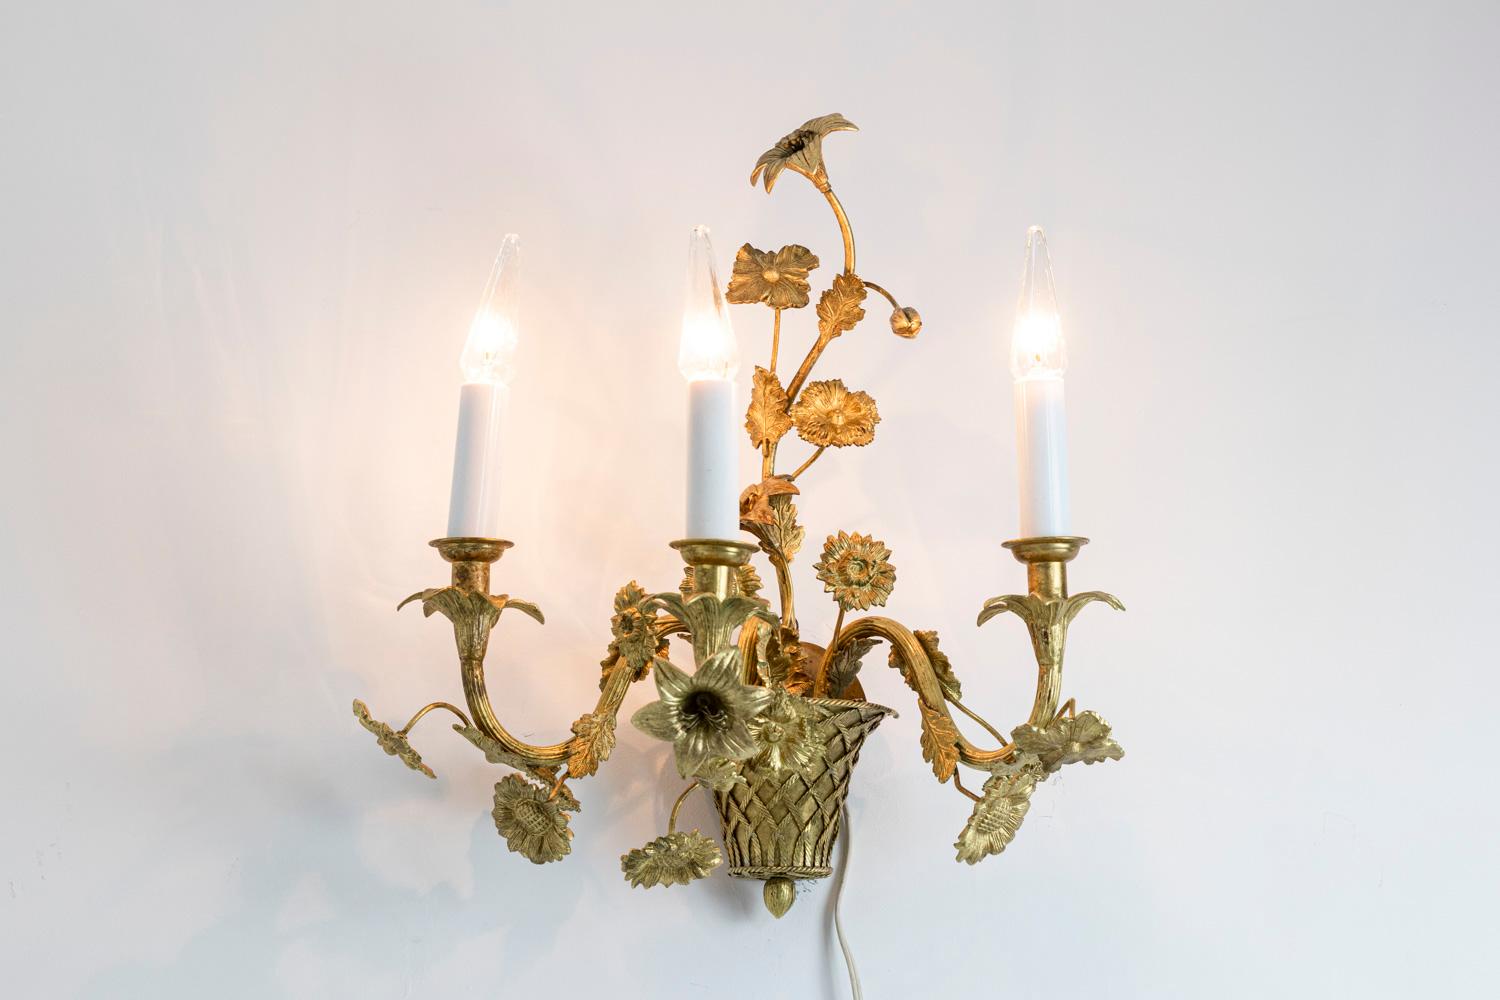 Pair of Louis XV style wall sconces in gilt bronze with three fires. Braided base in pot shaped on which are fixed three S-shaped branches with floral pattern. Cups decorated with flowers.

Work realized in the 1900s.

New and functional